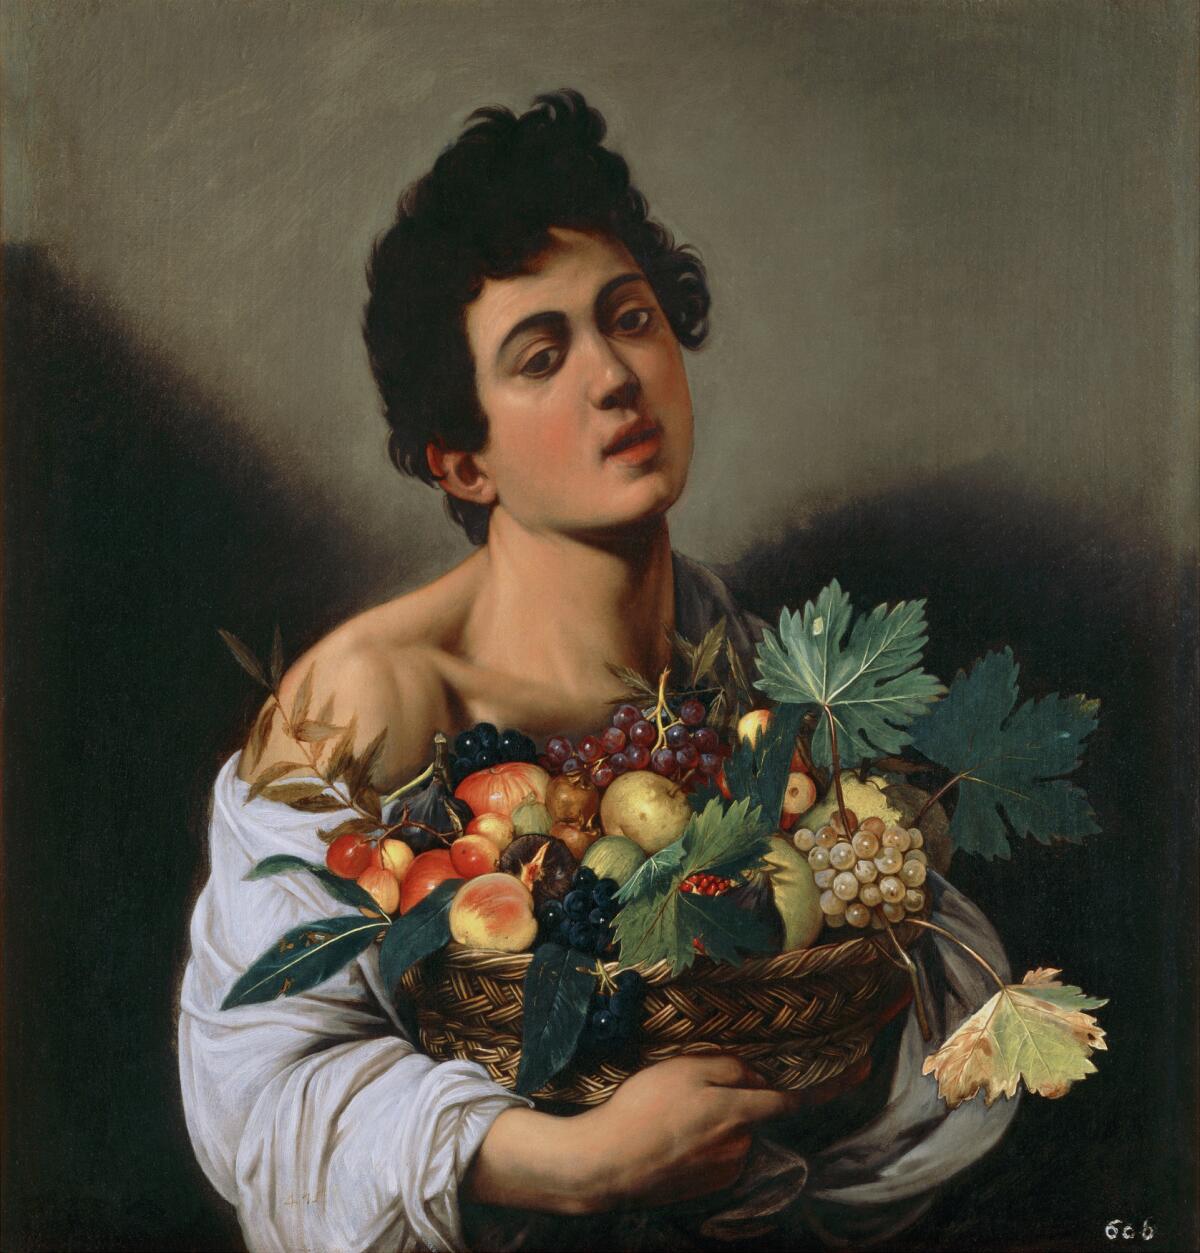 Caravaggi's "Boy With a Basket of Fruit," about 1593-94. Oil on canvas.